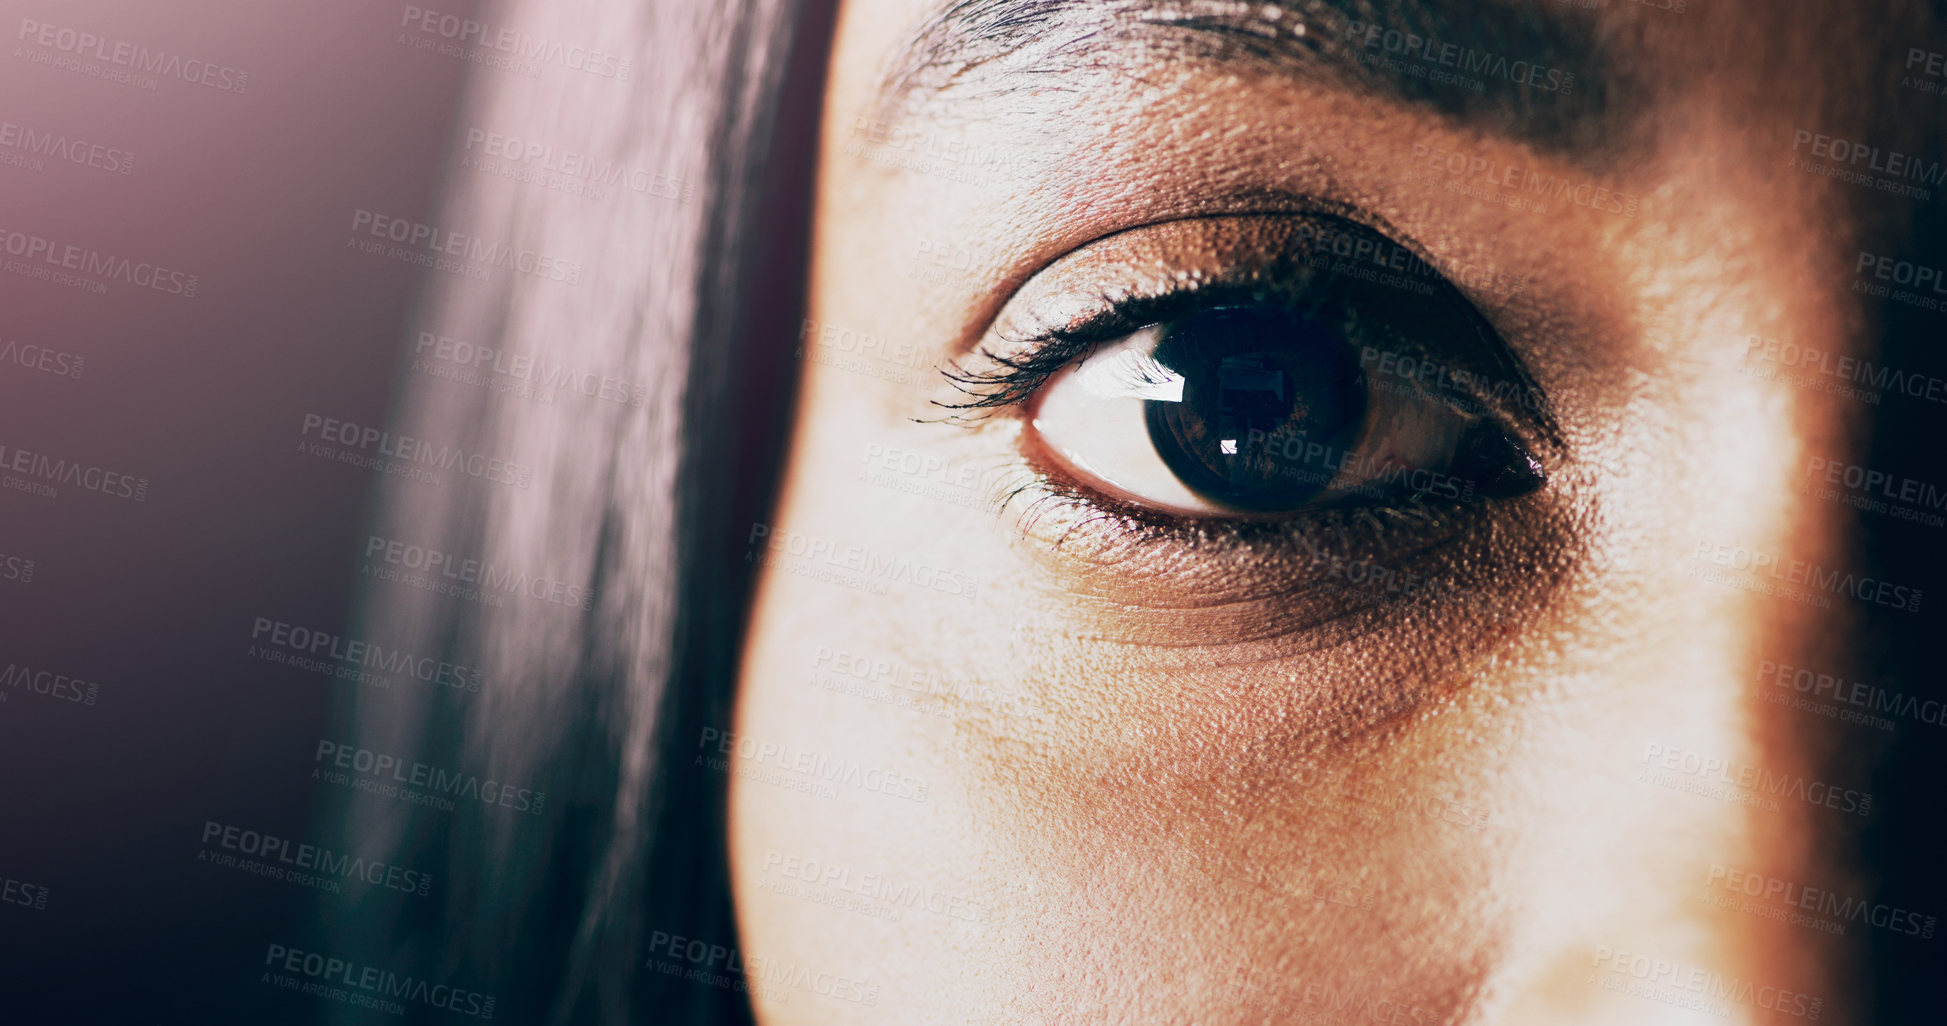 Buy stock photo Closeup shot of a beautiful young woman's eye against a dark background